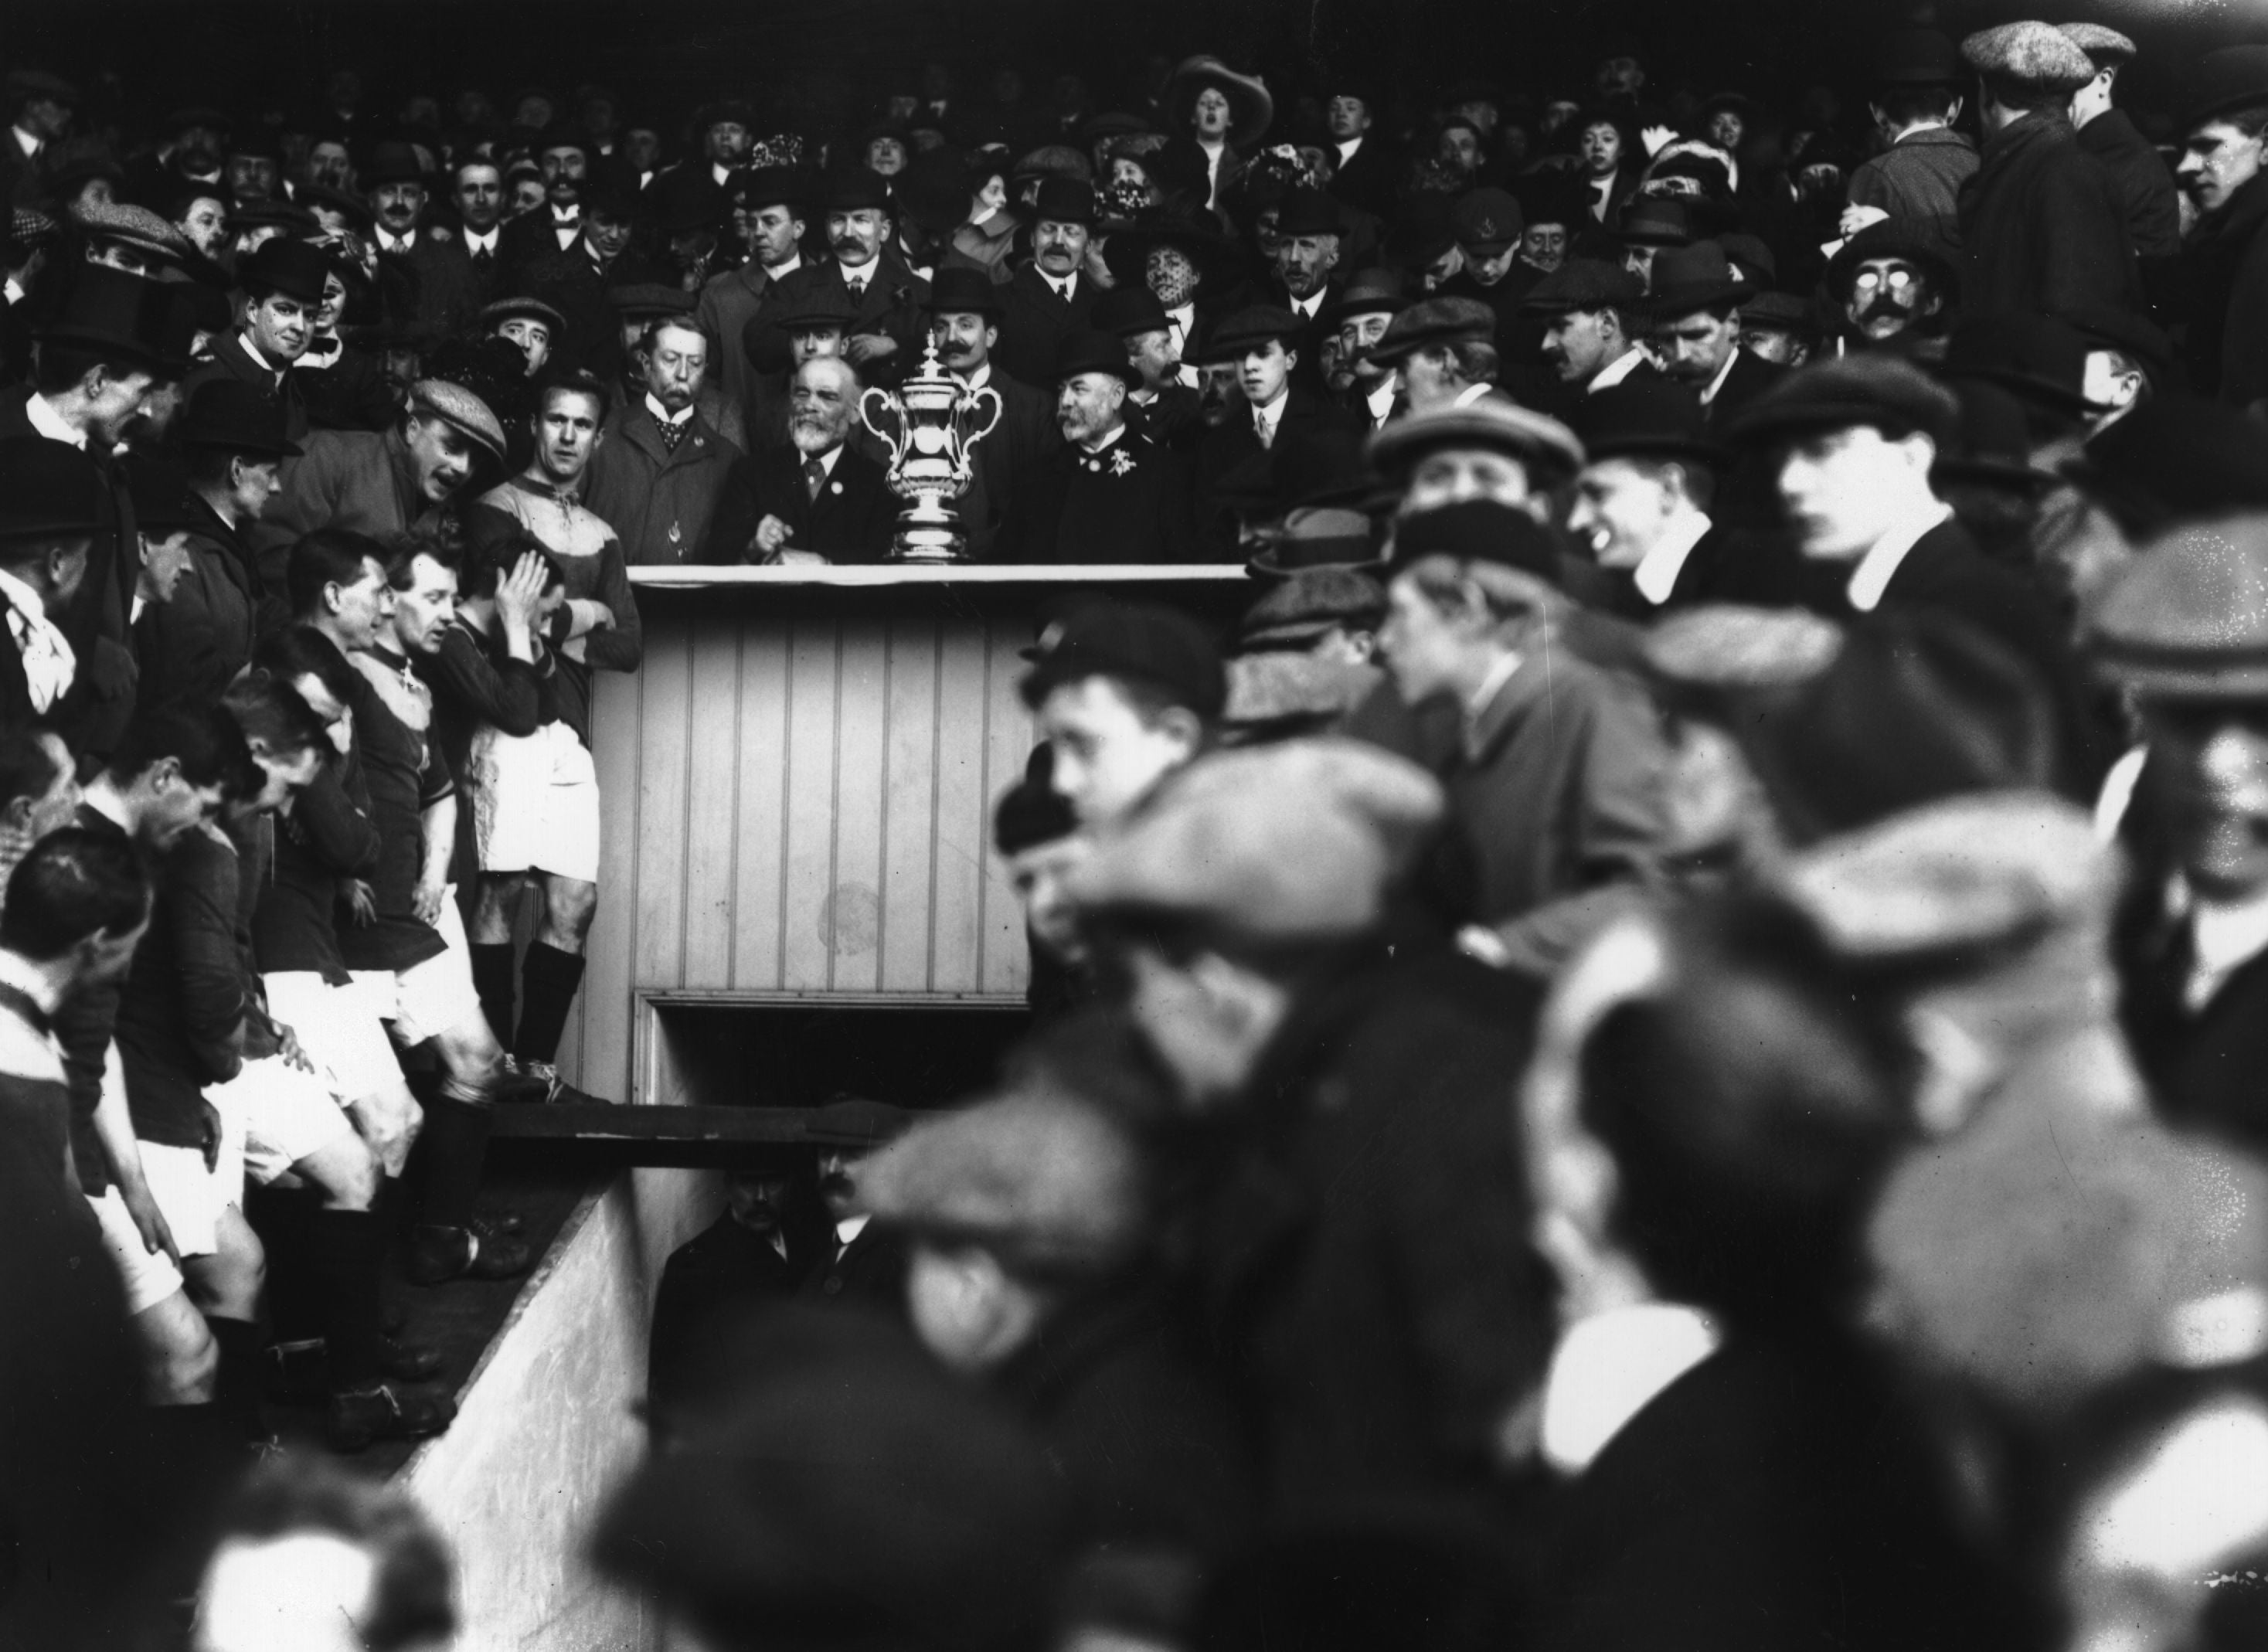 Bradford’s players await the FA Cup trophy presentation in 1911